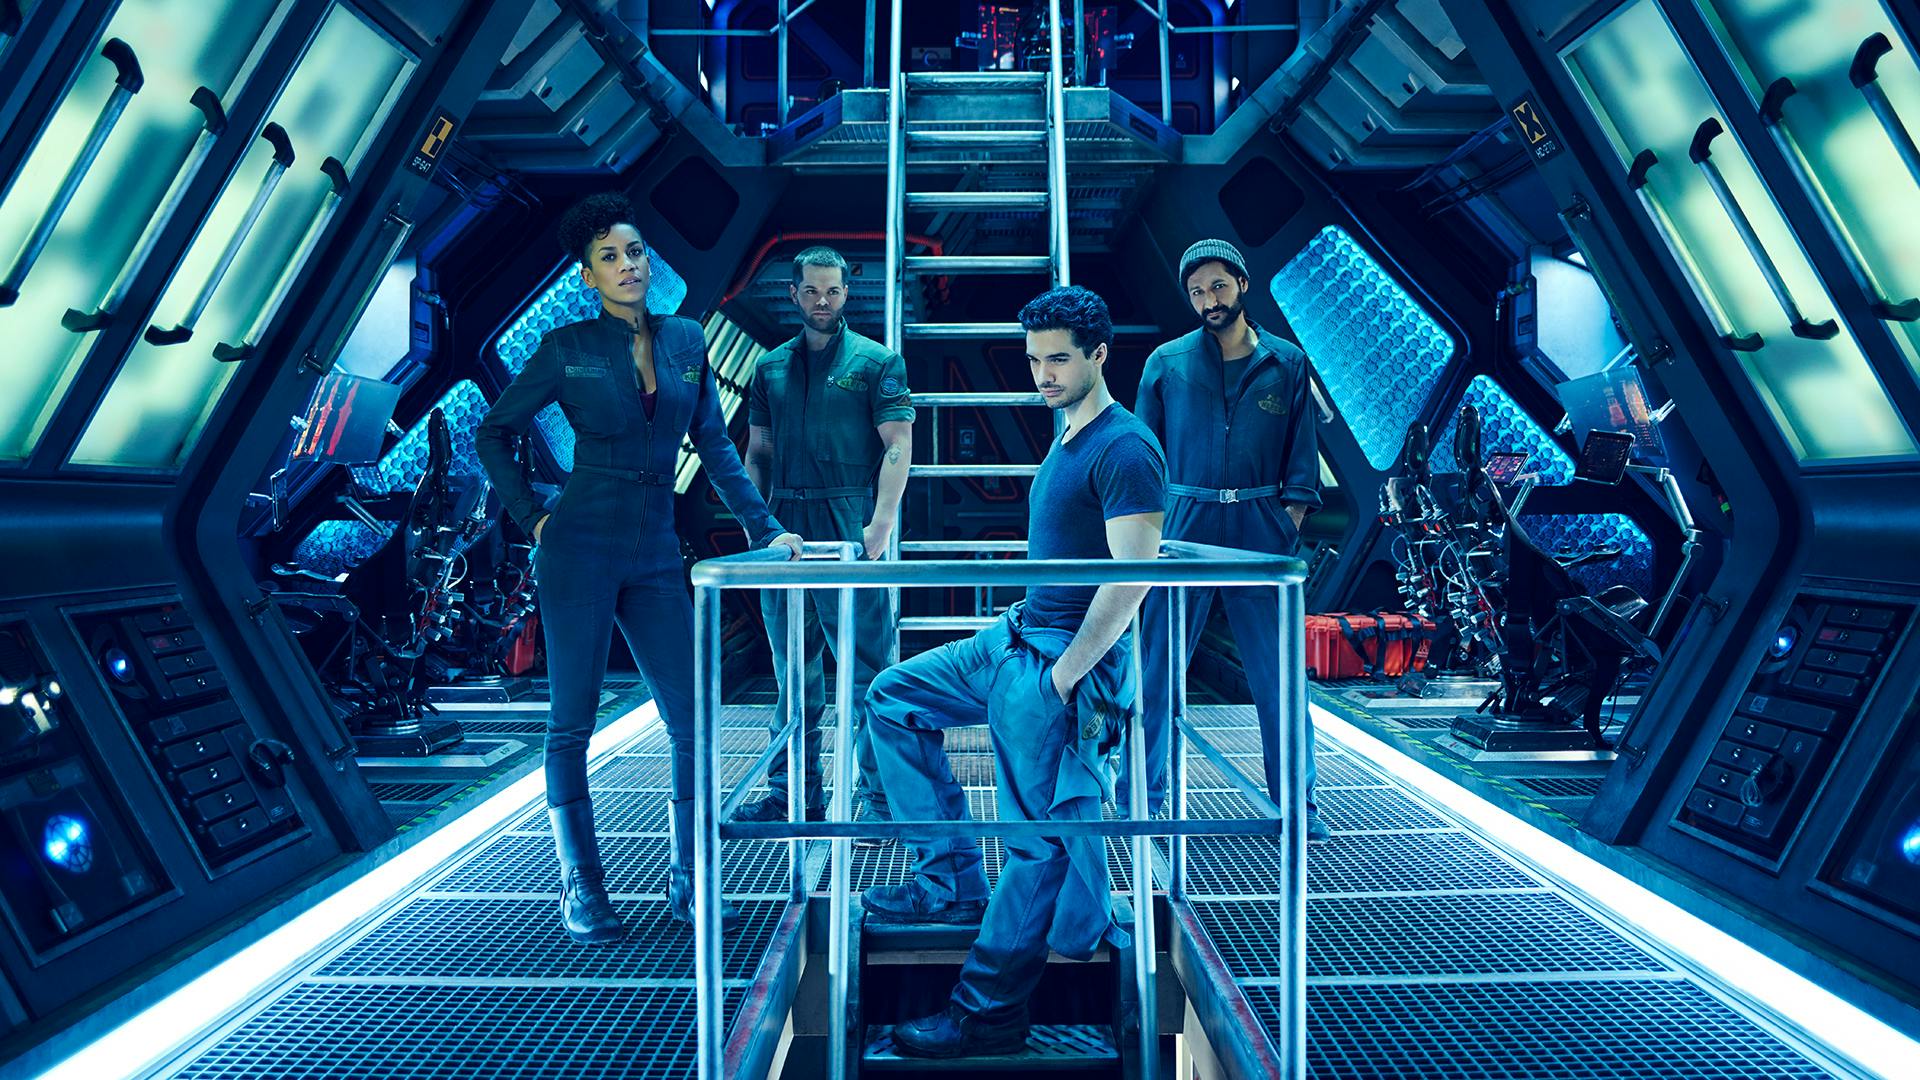 best sci fi sows 2018 the expanse